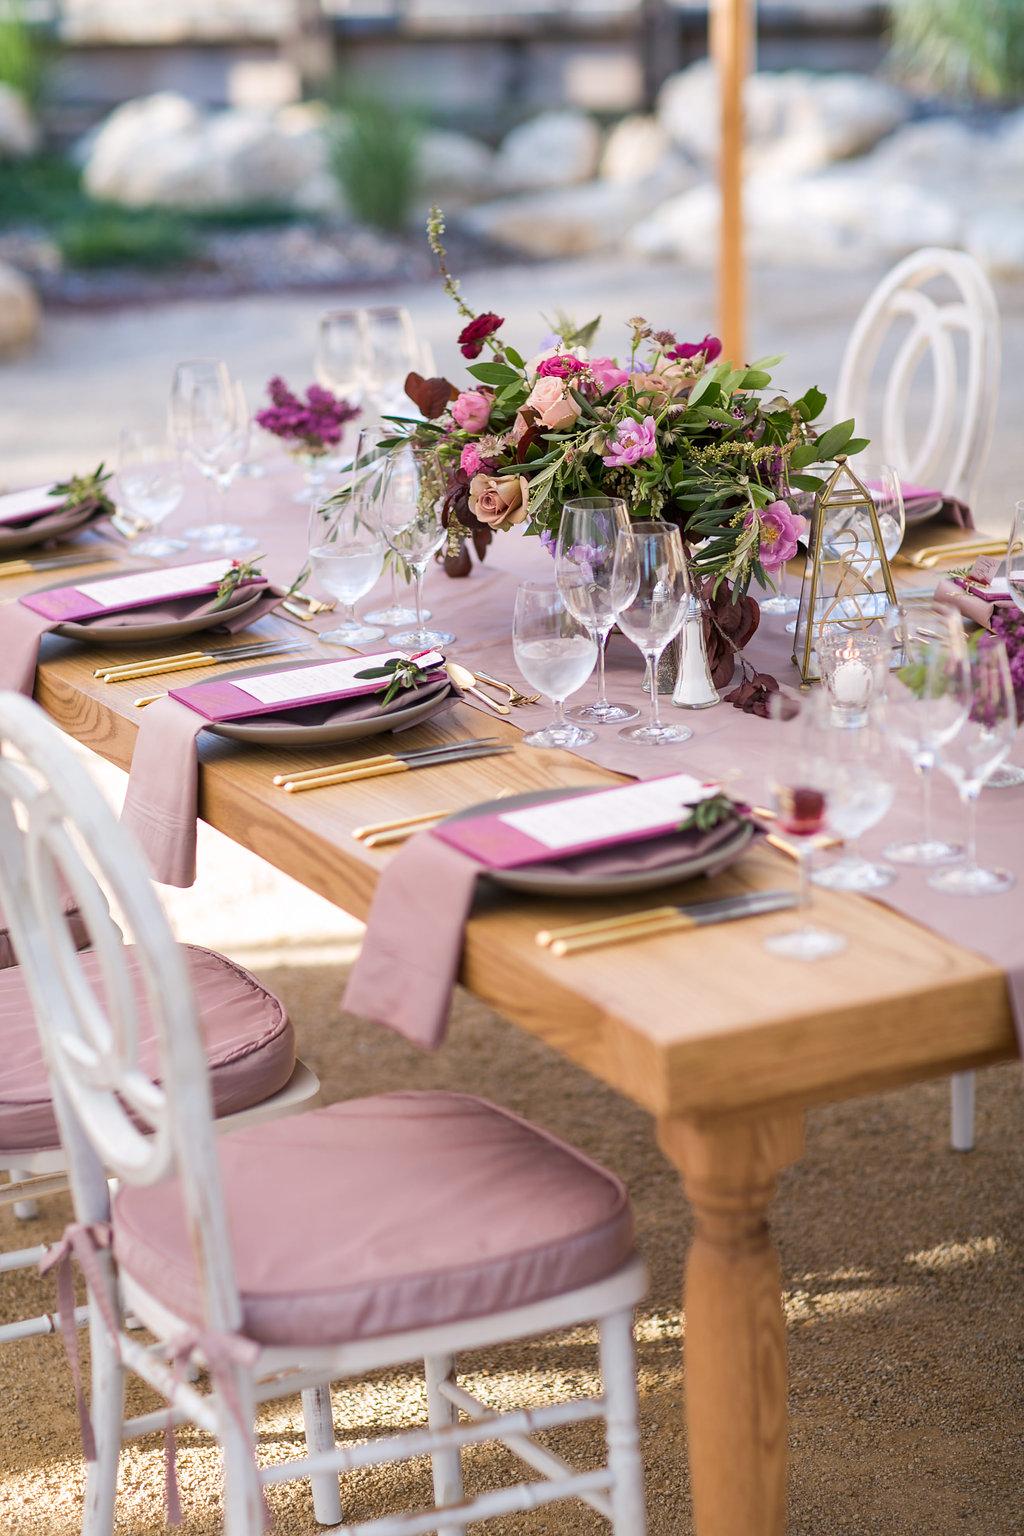 More than 20 Vendors Came Together for this Beautiful Inspiration Shoot ...